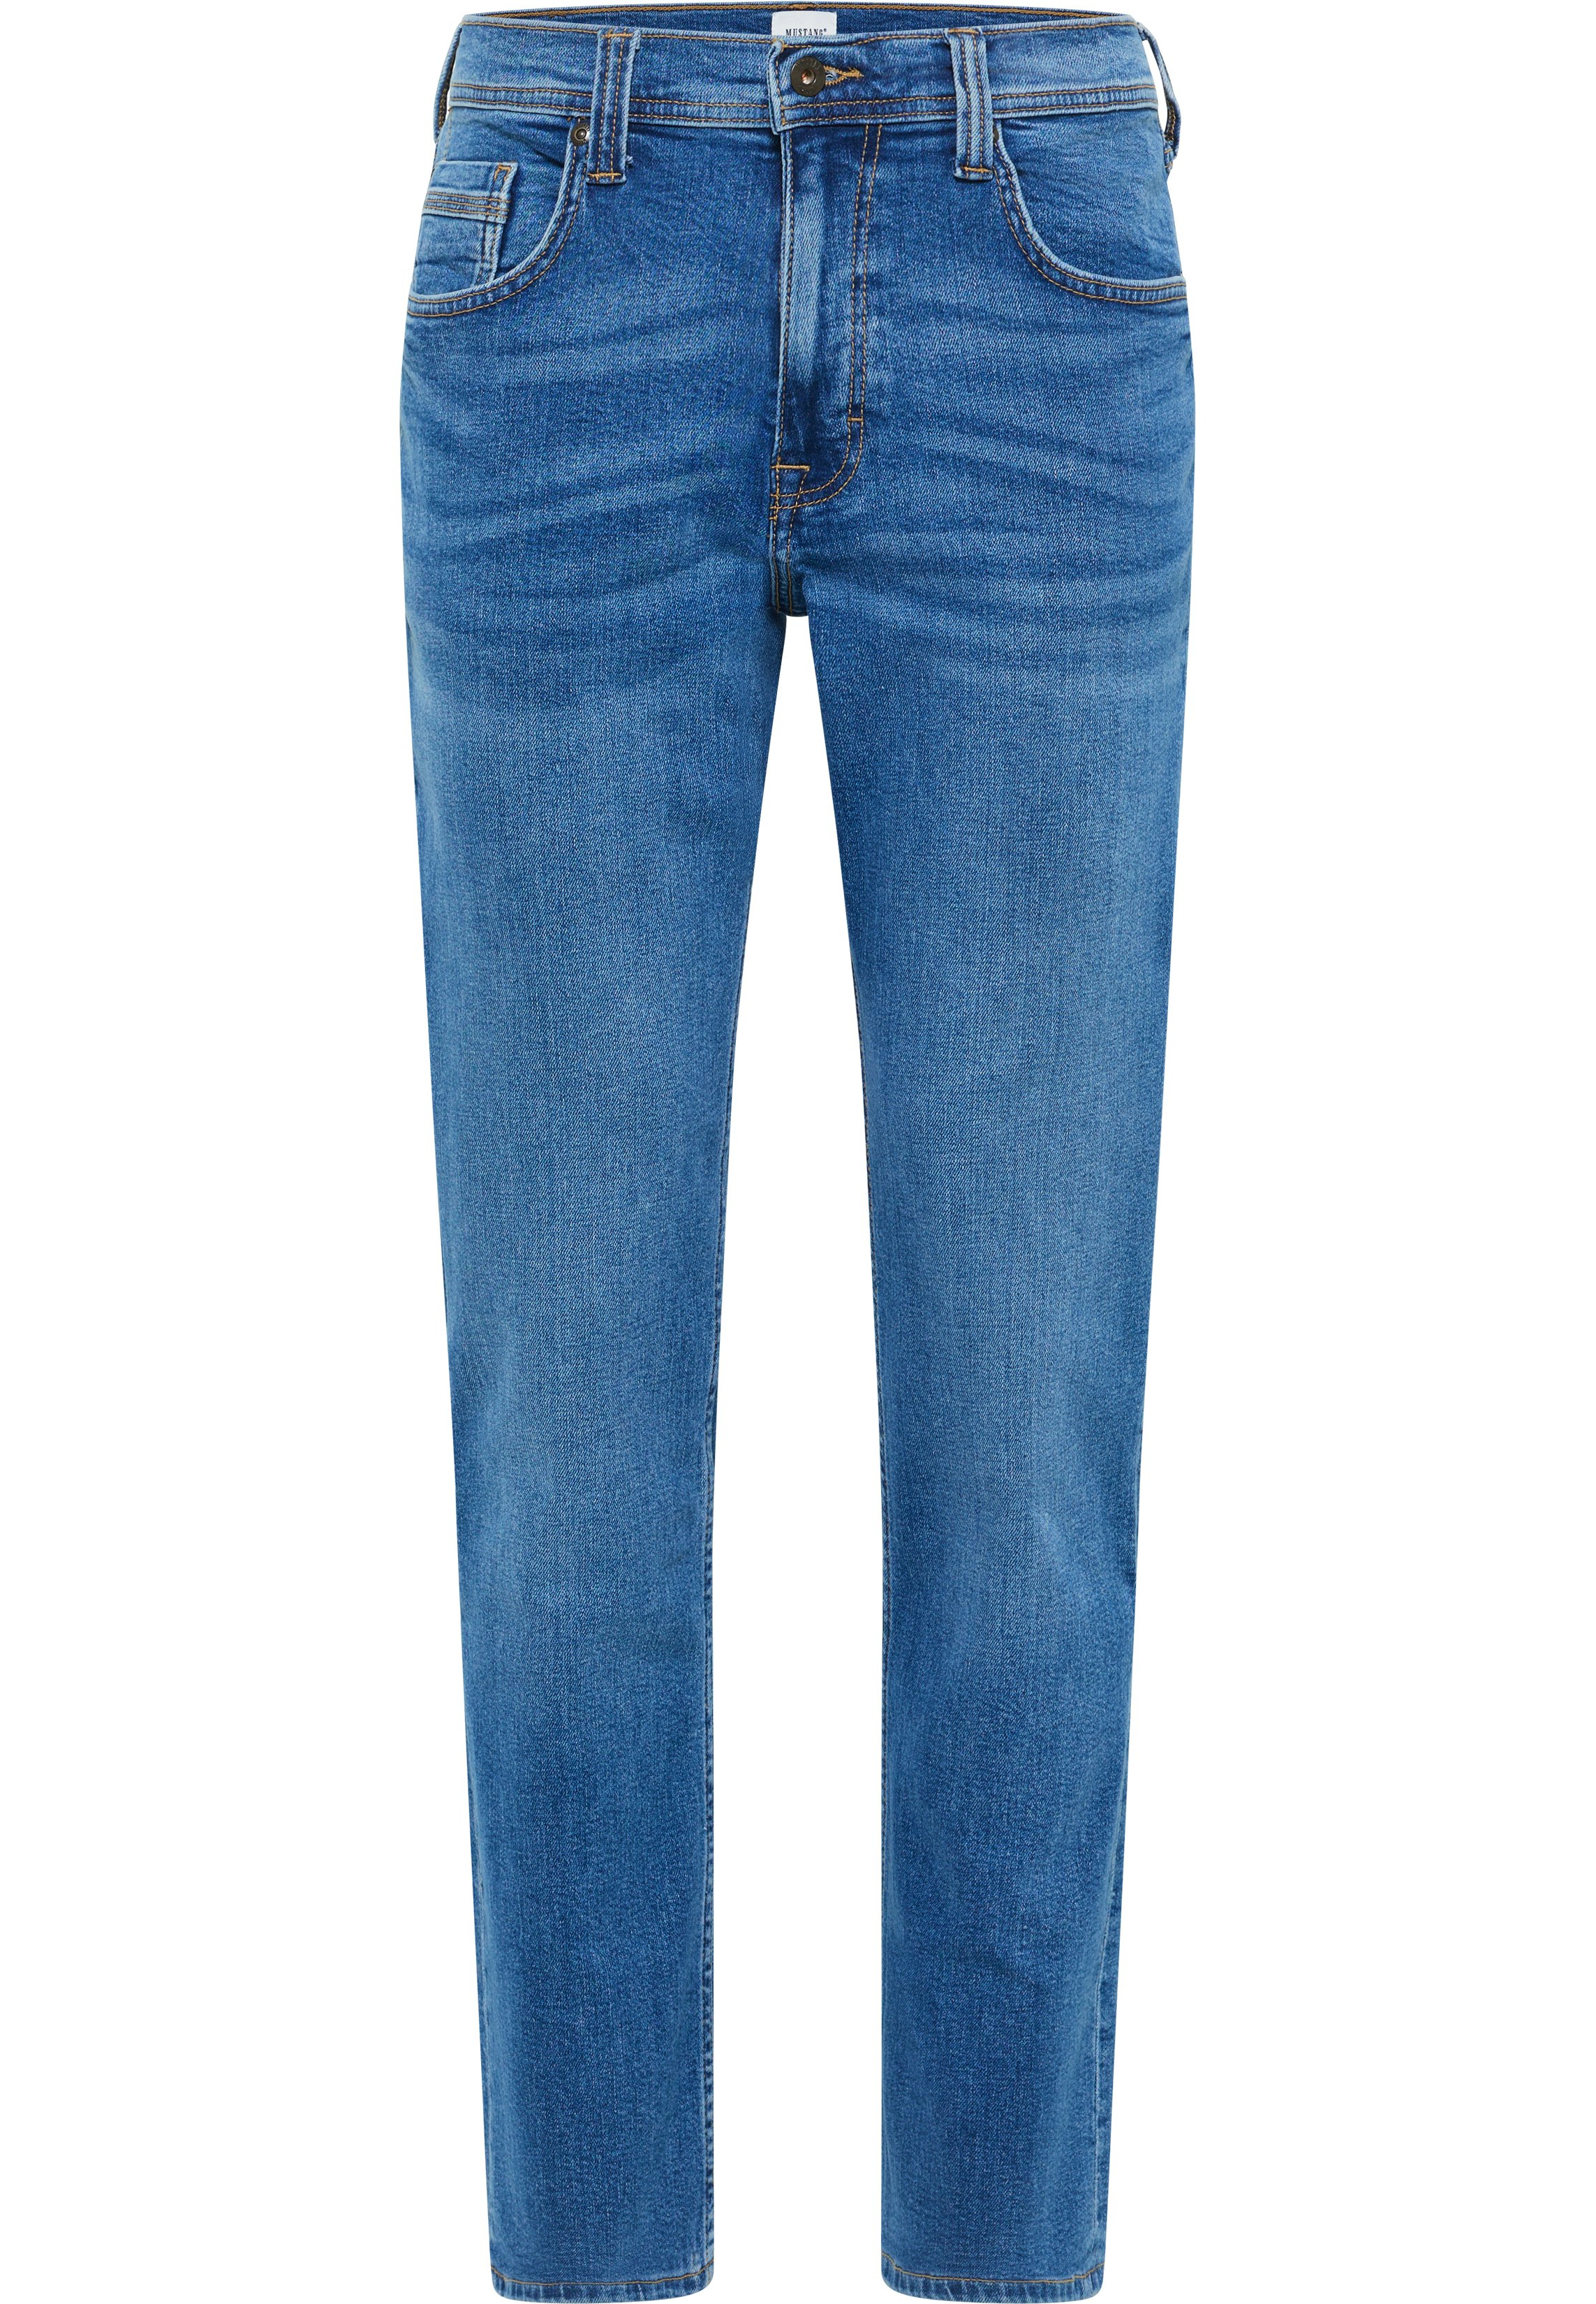 Mustang Jeans Washington Straight Fit dusk blue washed extra lang